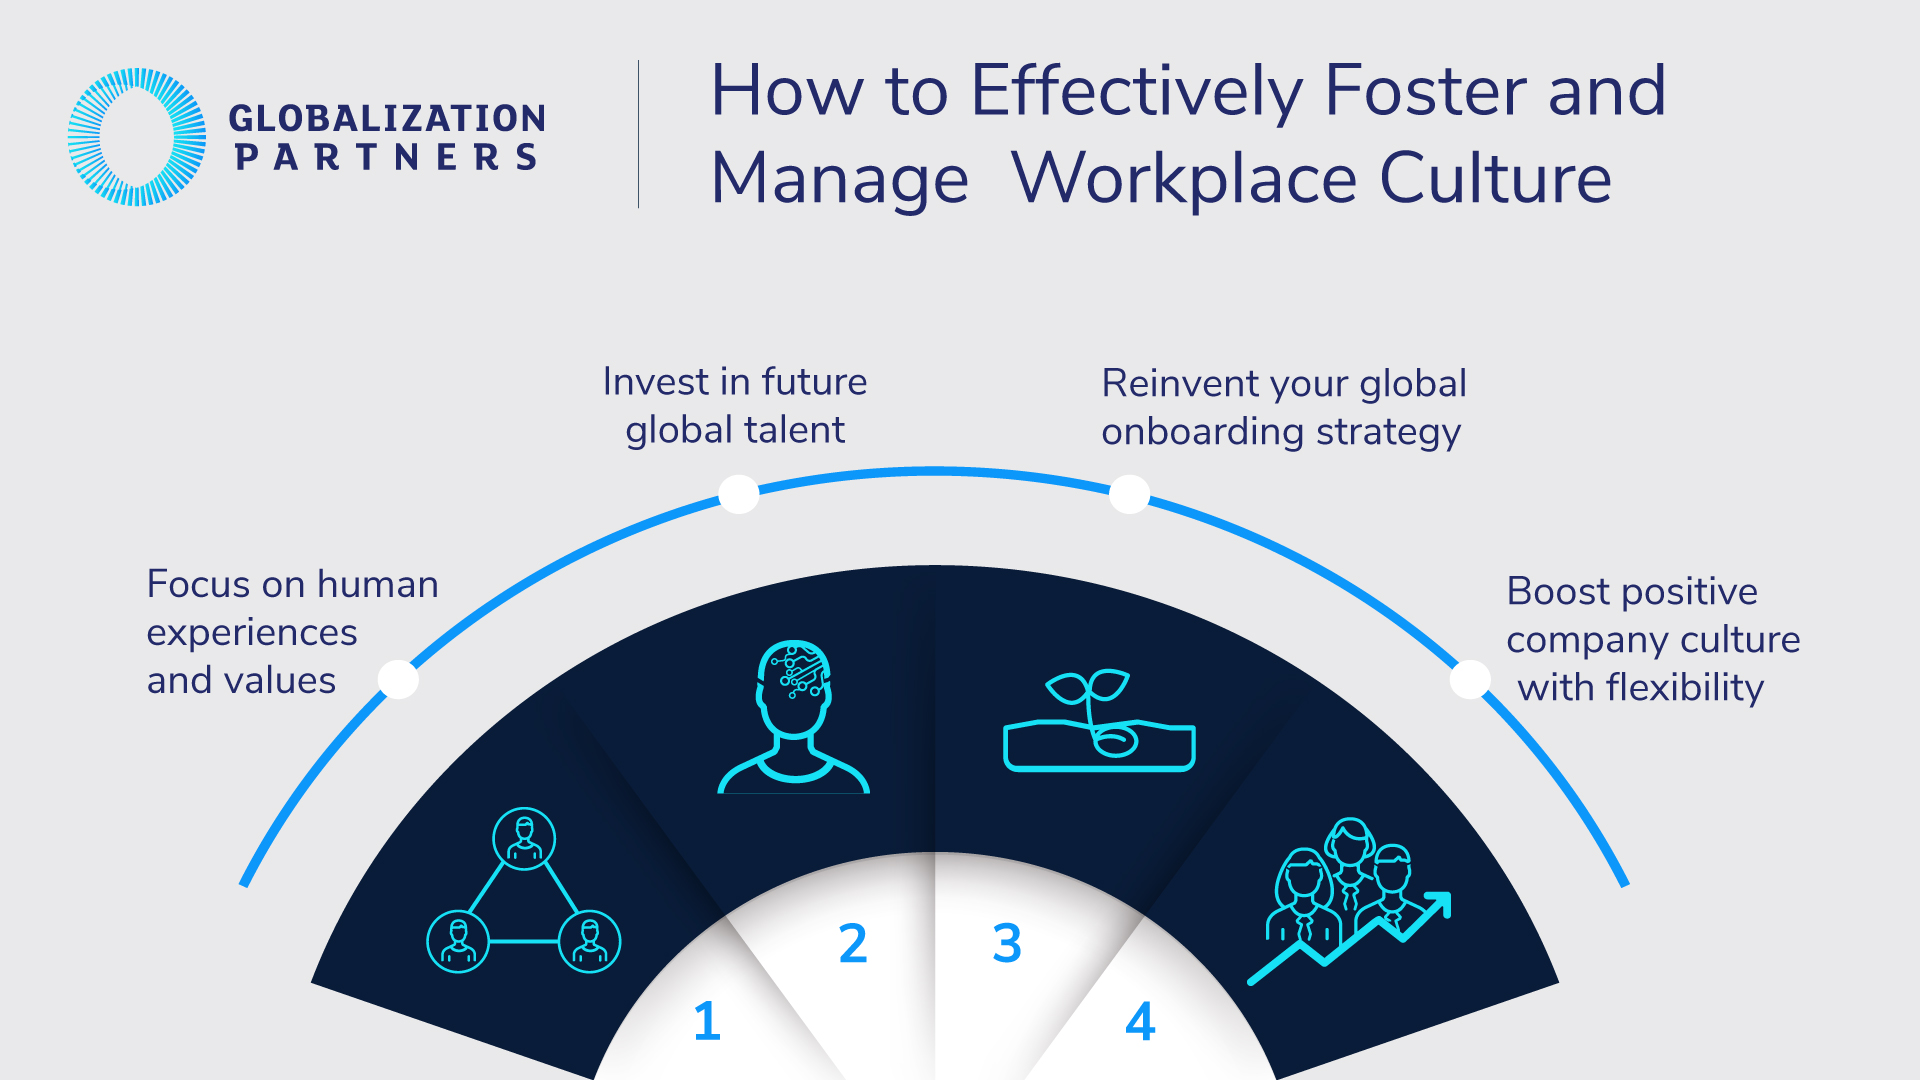 How to Effectively Foster and Manage Workplace Culture